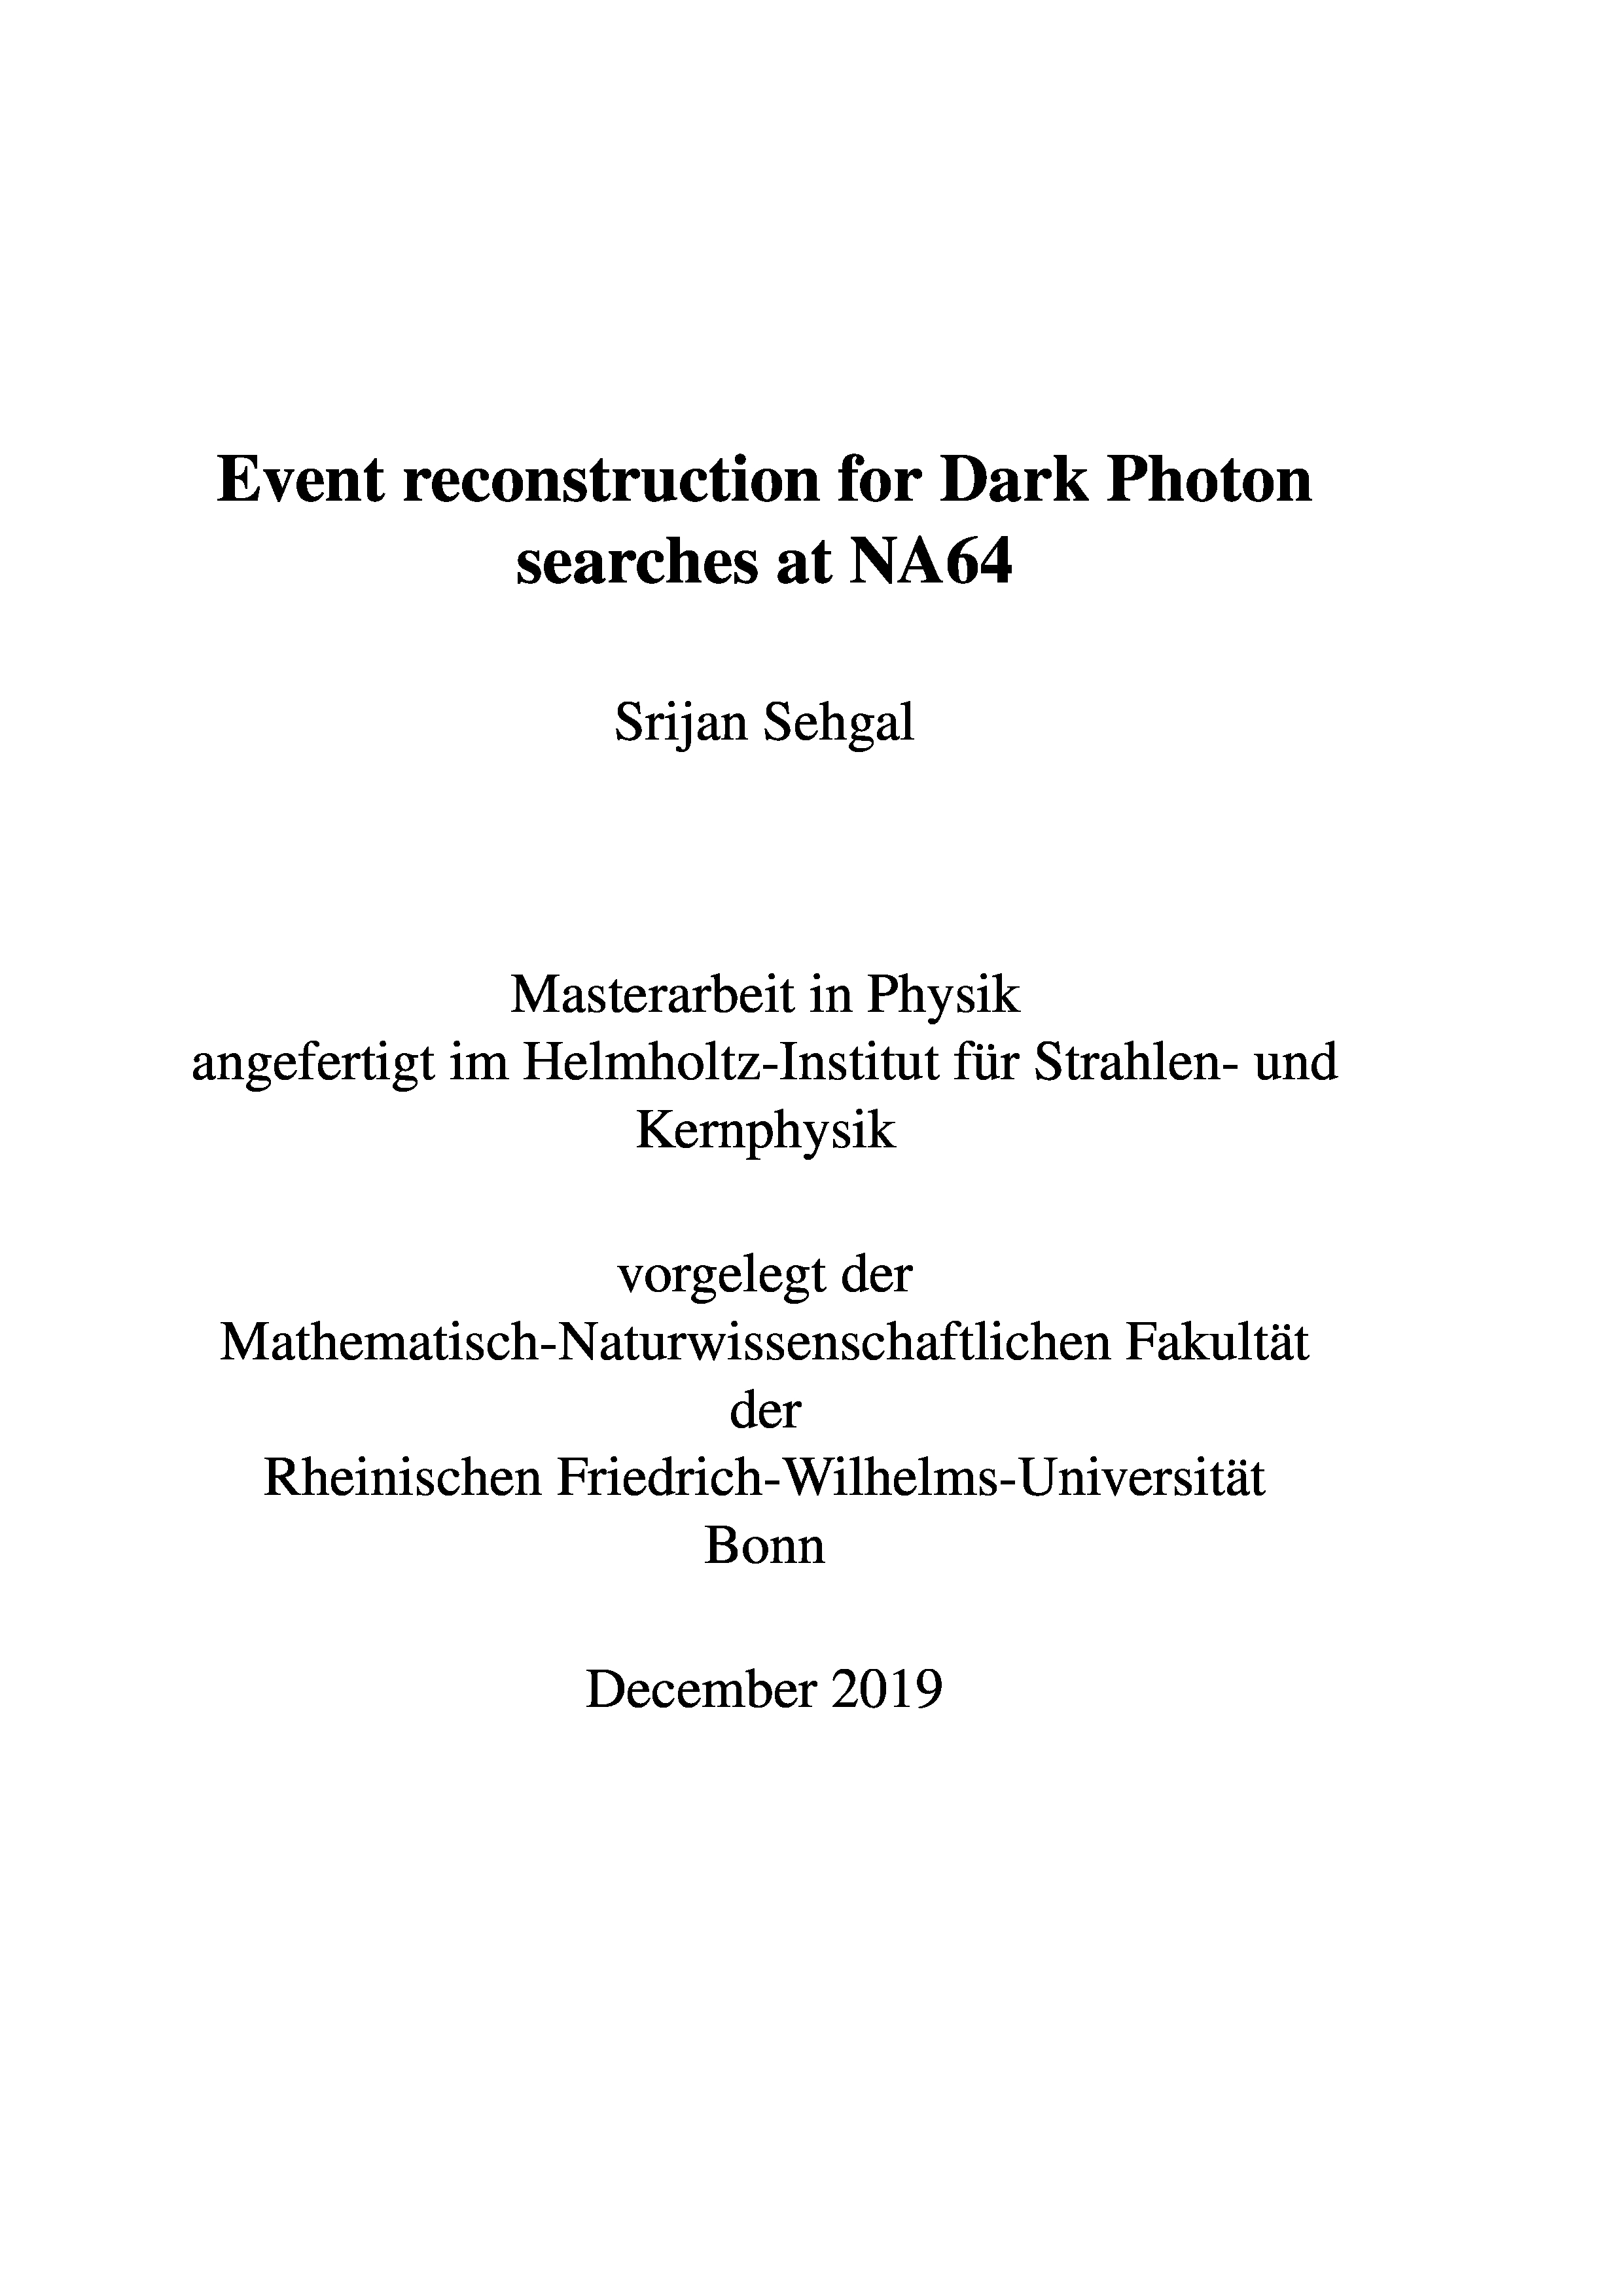 Event reconstruction for Dark Photon searches at NA64